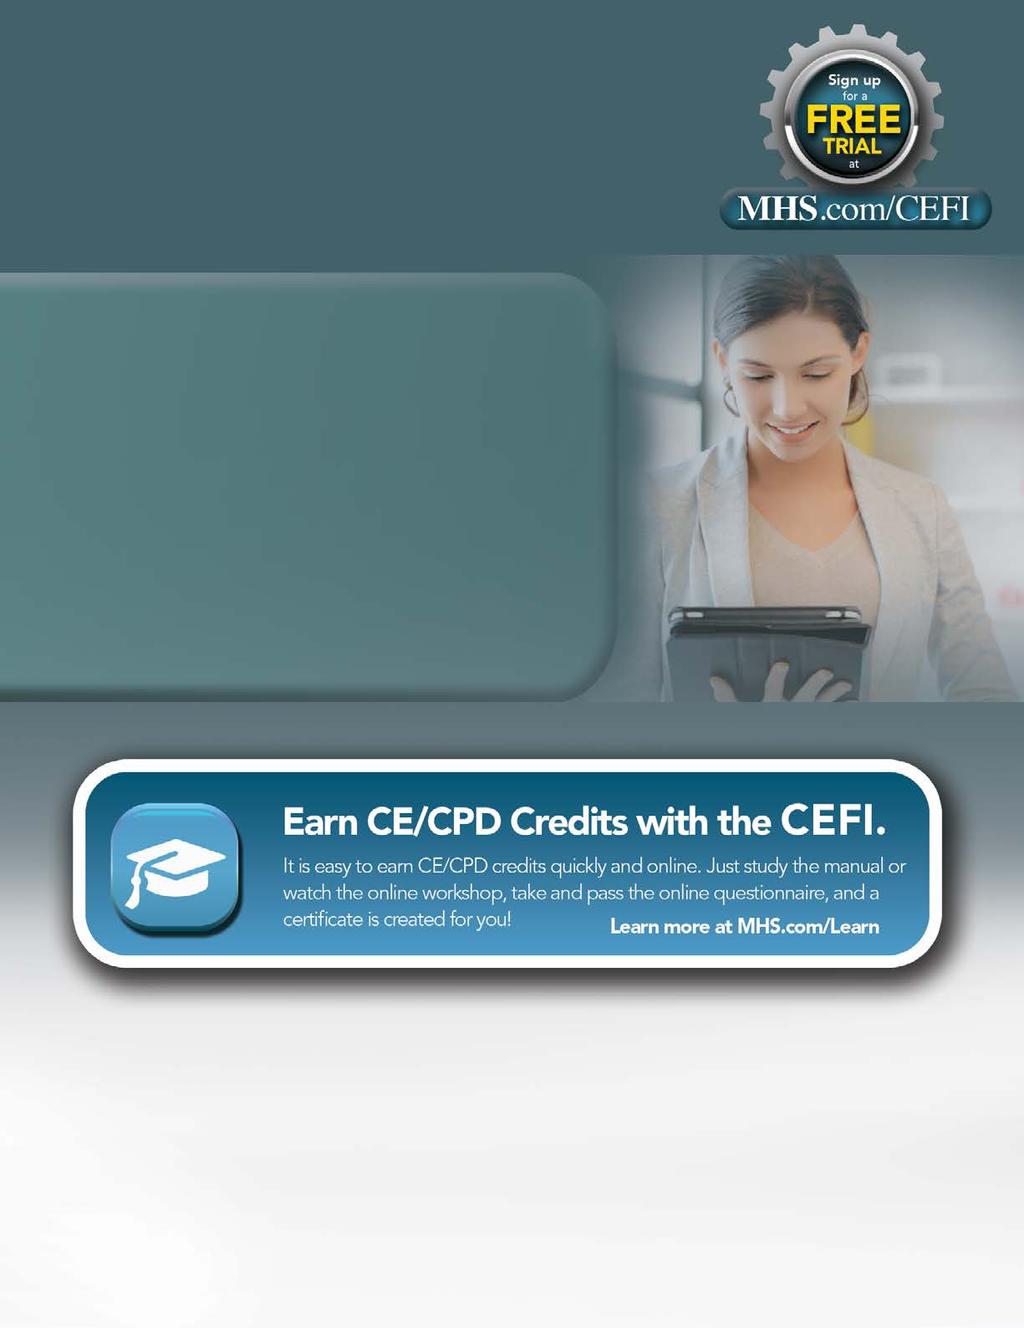 Administer, Score, and Report the CEFI with the MHS Online Assessment Center Improve Productivity and Efficiency without Compromising Quality